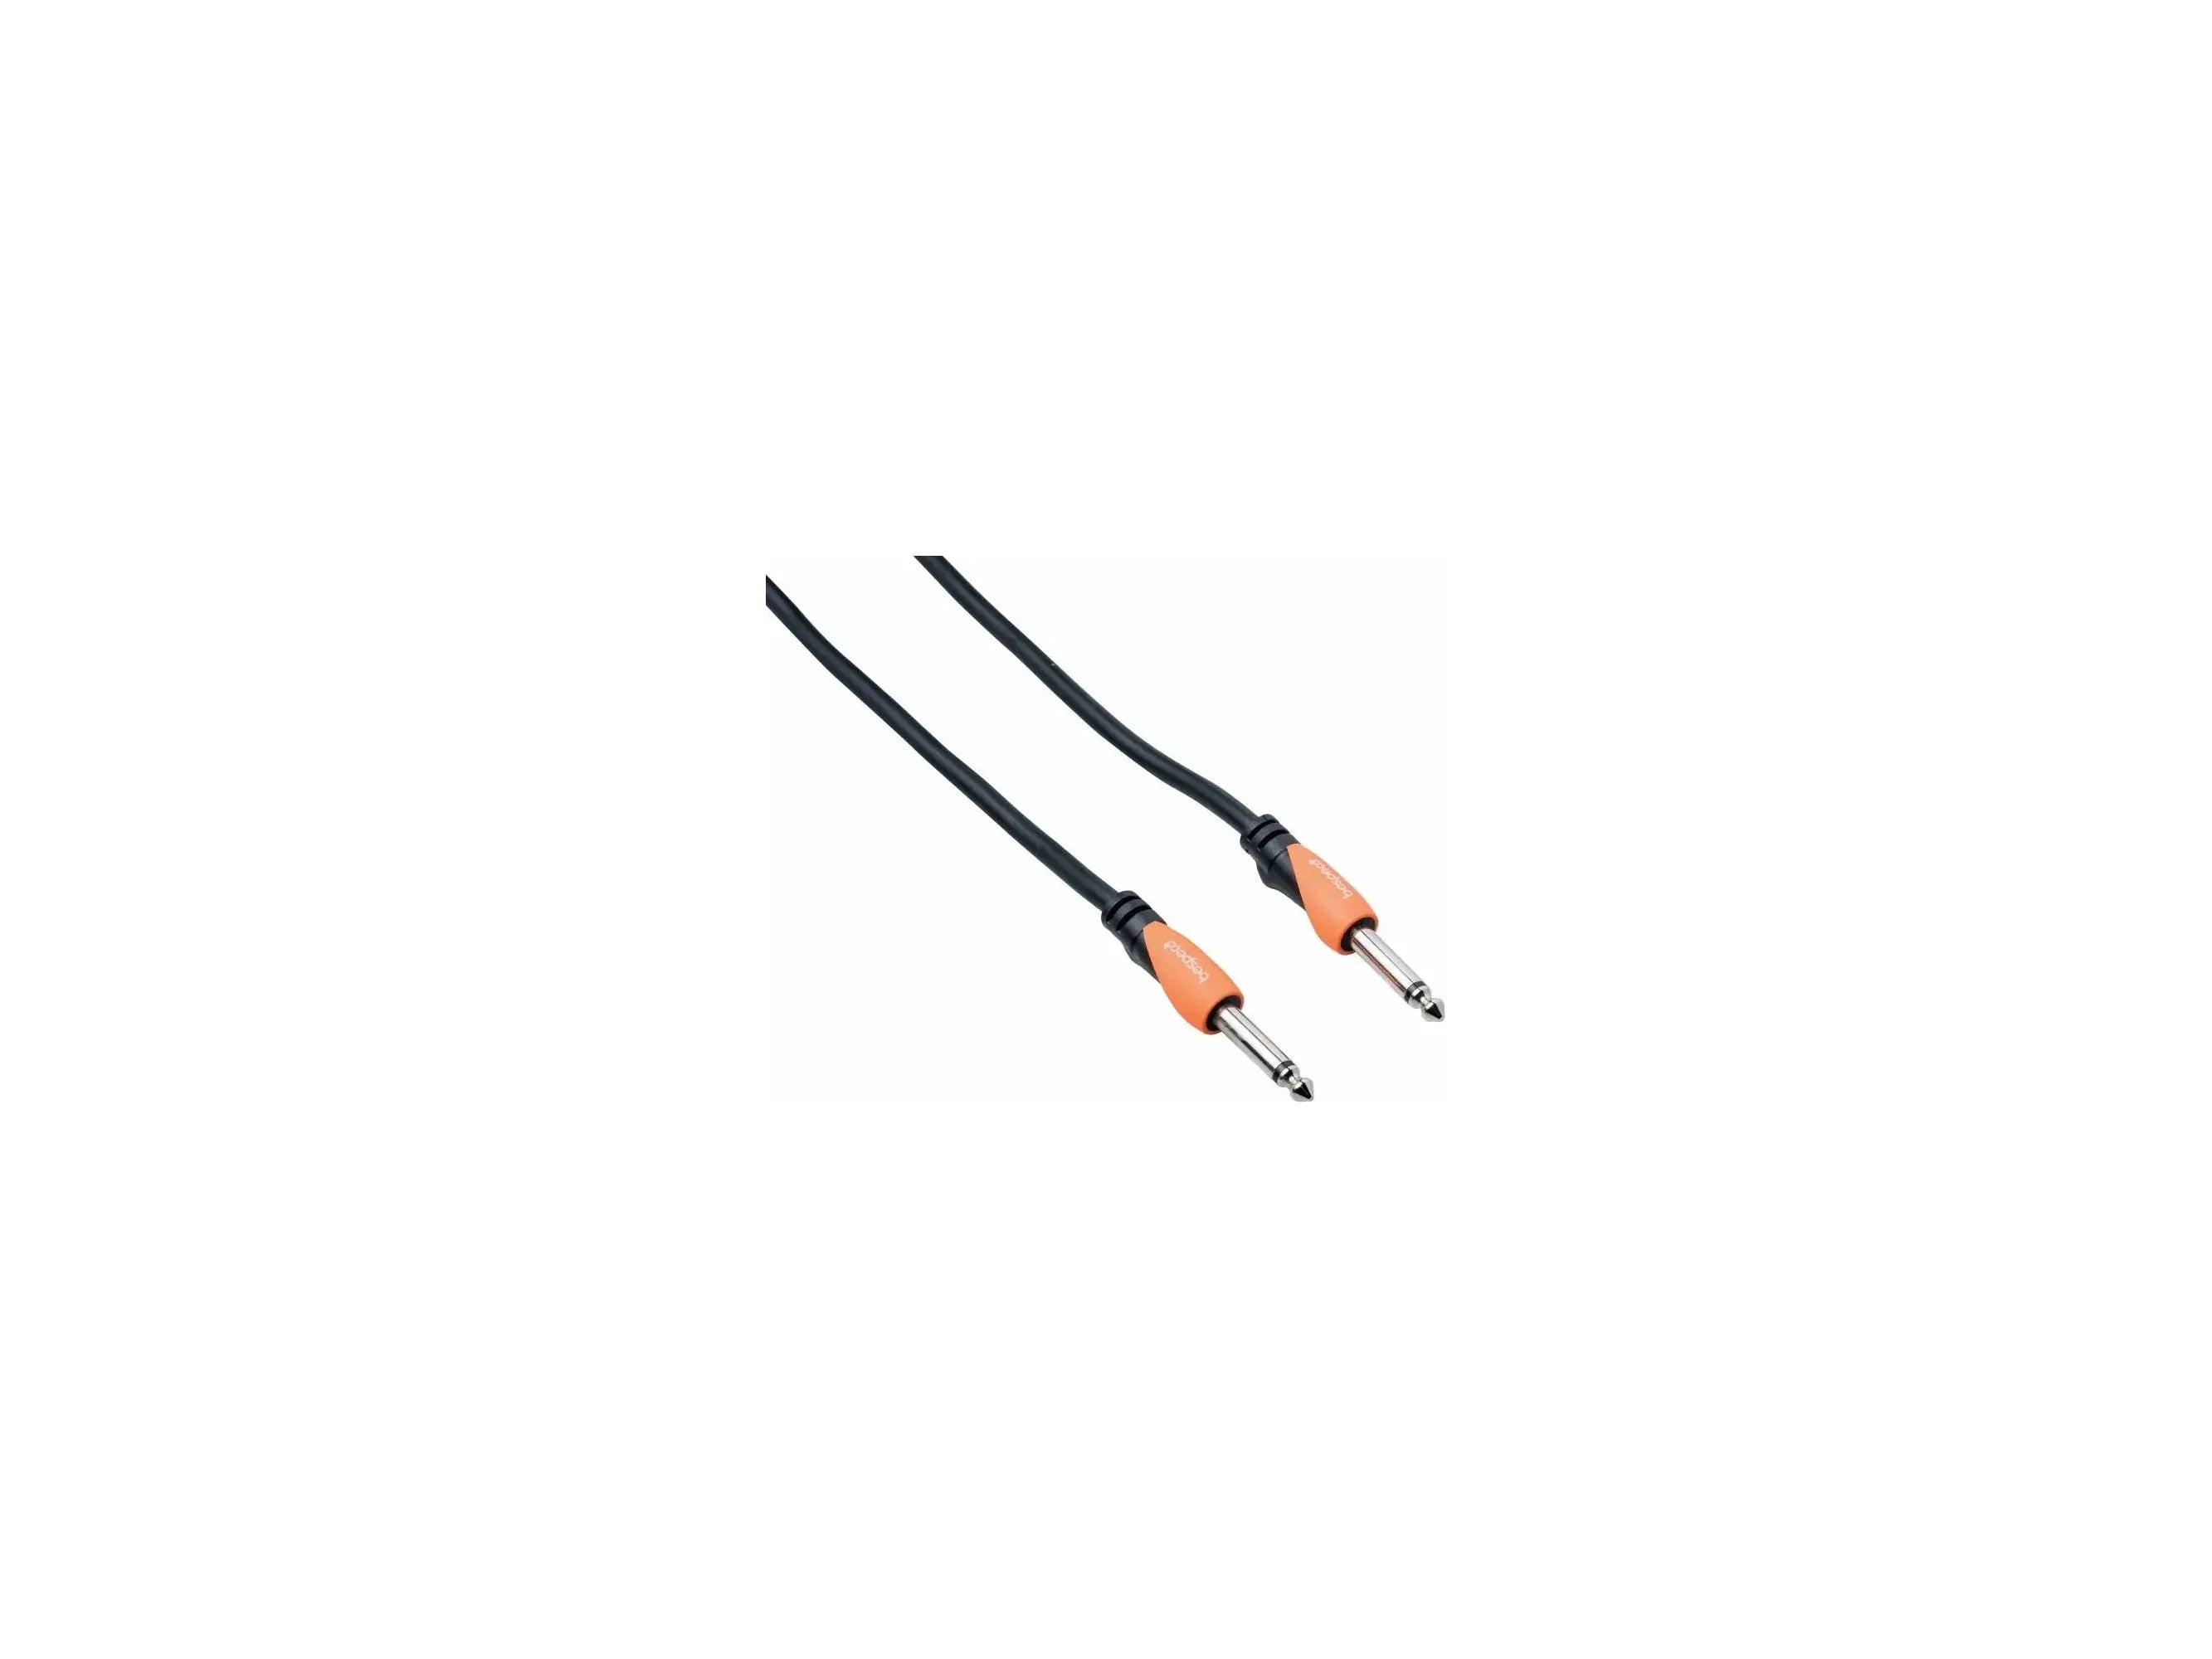 Bespeco SLJJ300 3m (10 foot) jack to jack cable